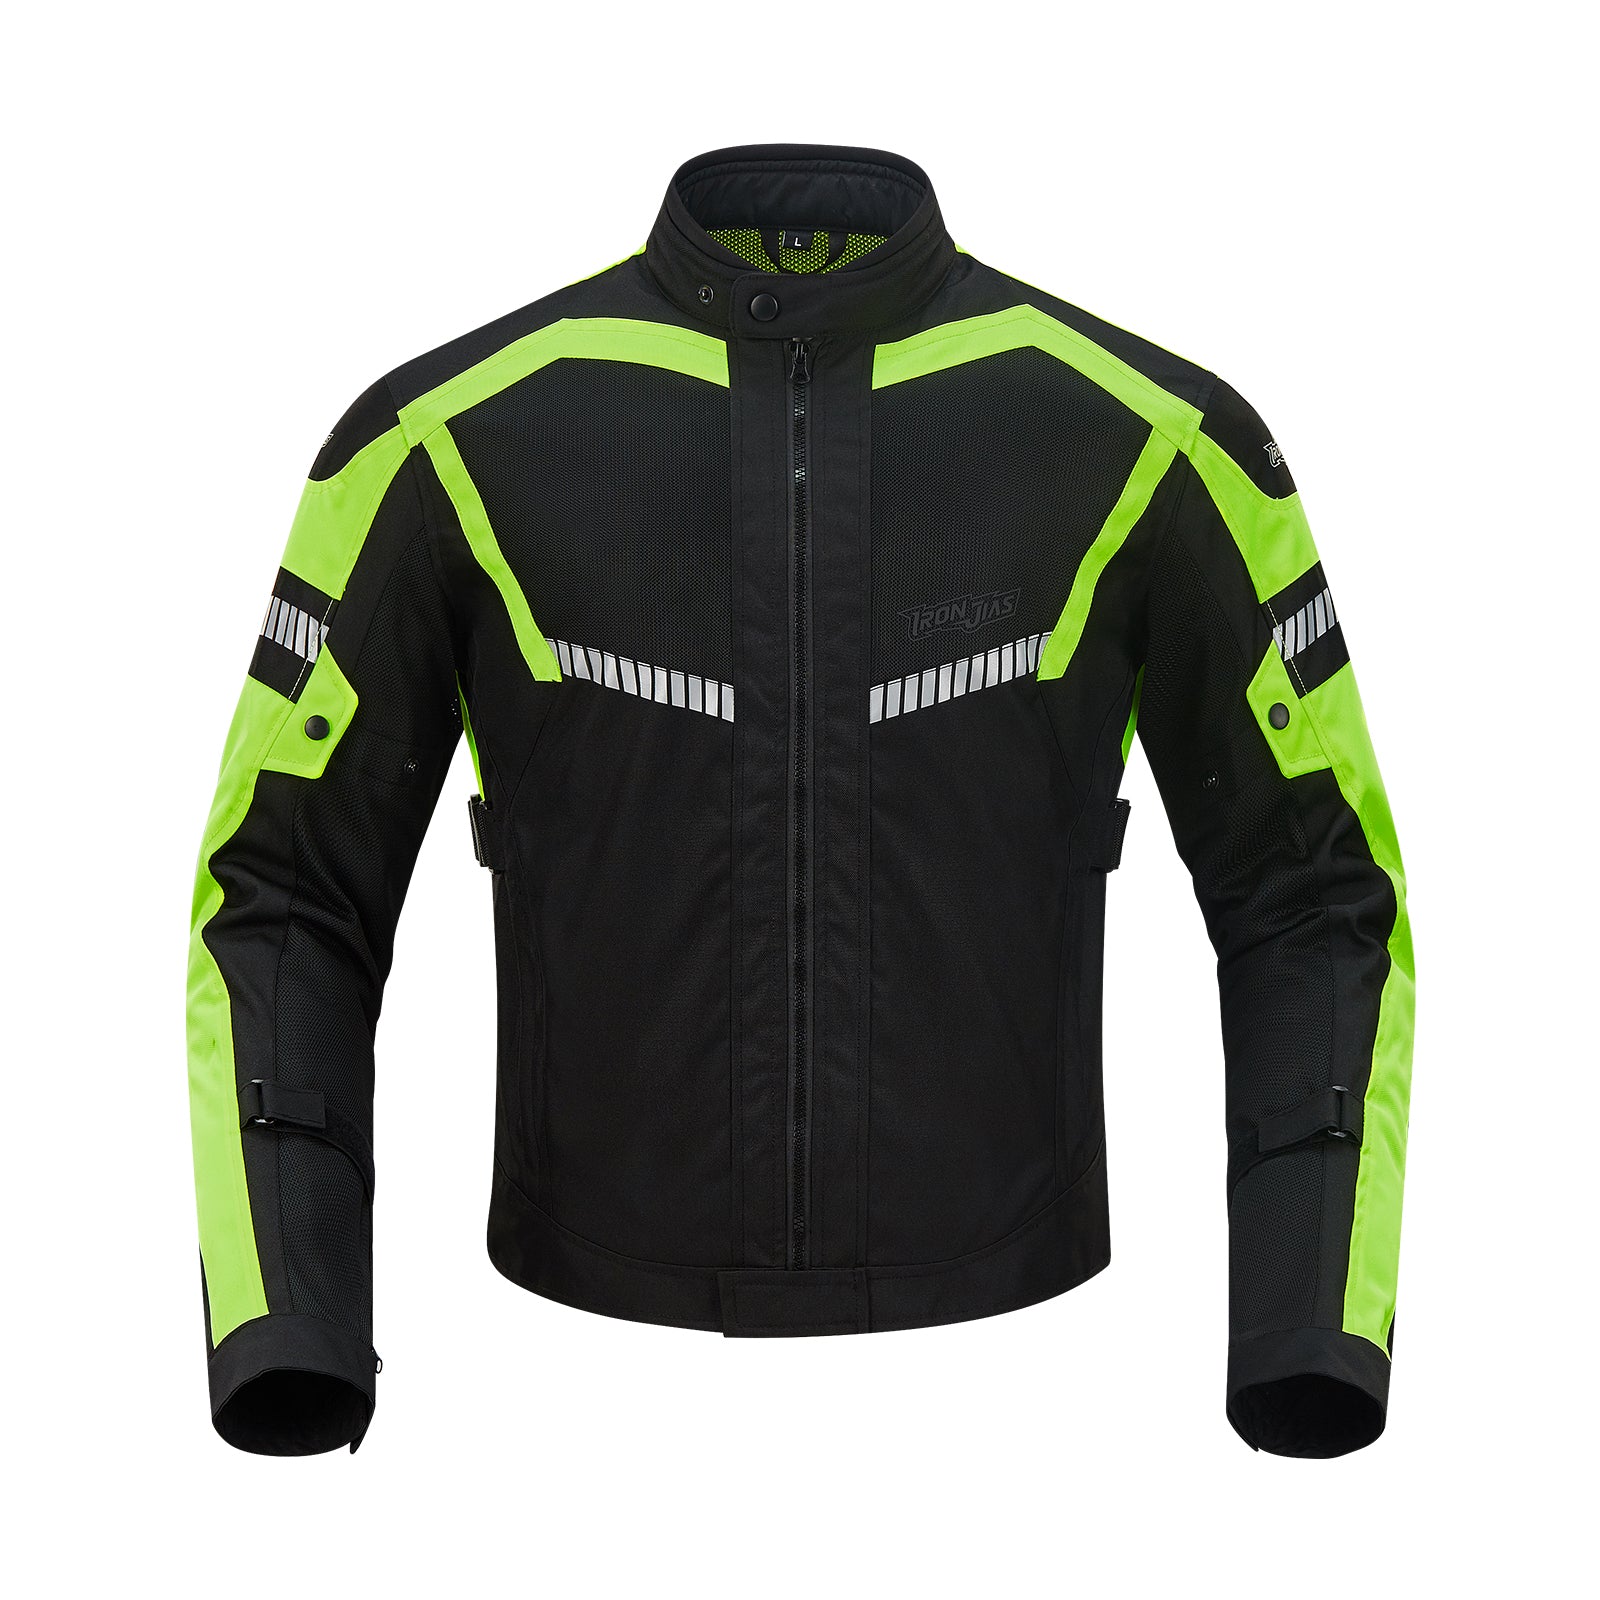 Men's Armored Vented Reflective Leather Motorcycle Jacket